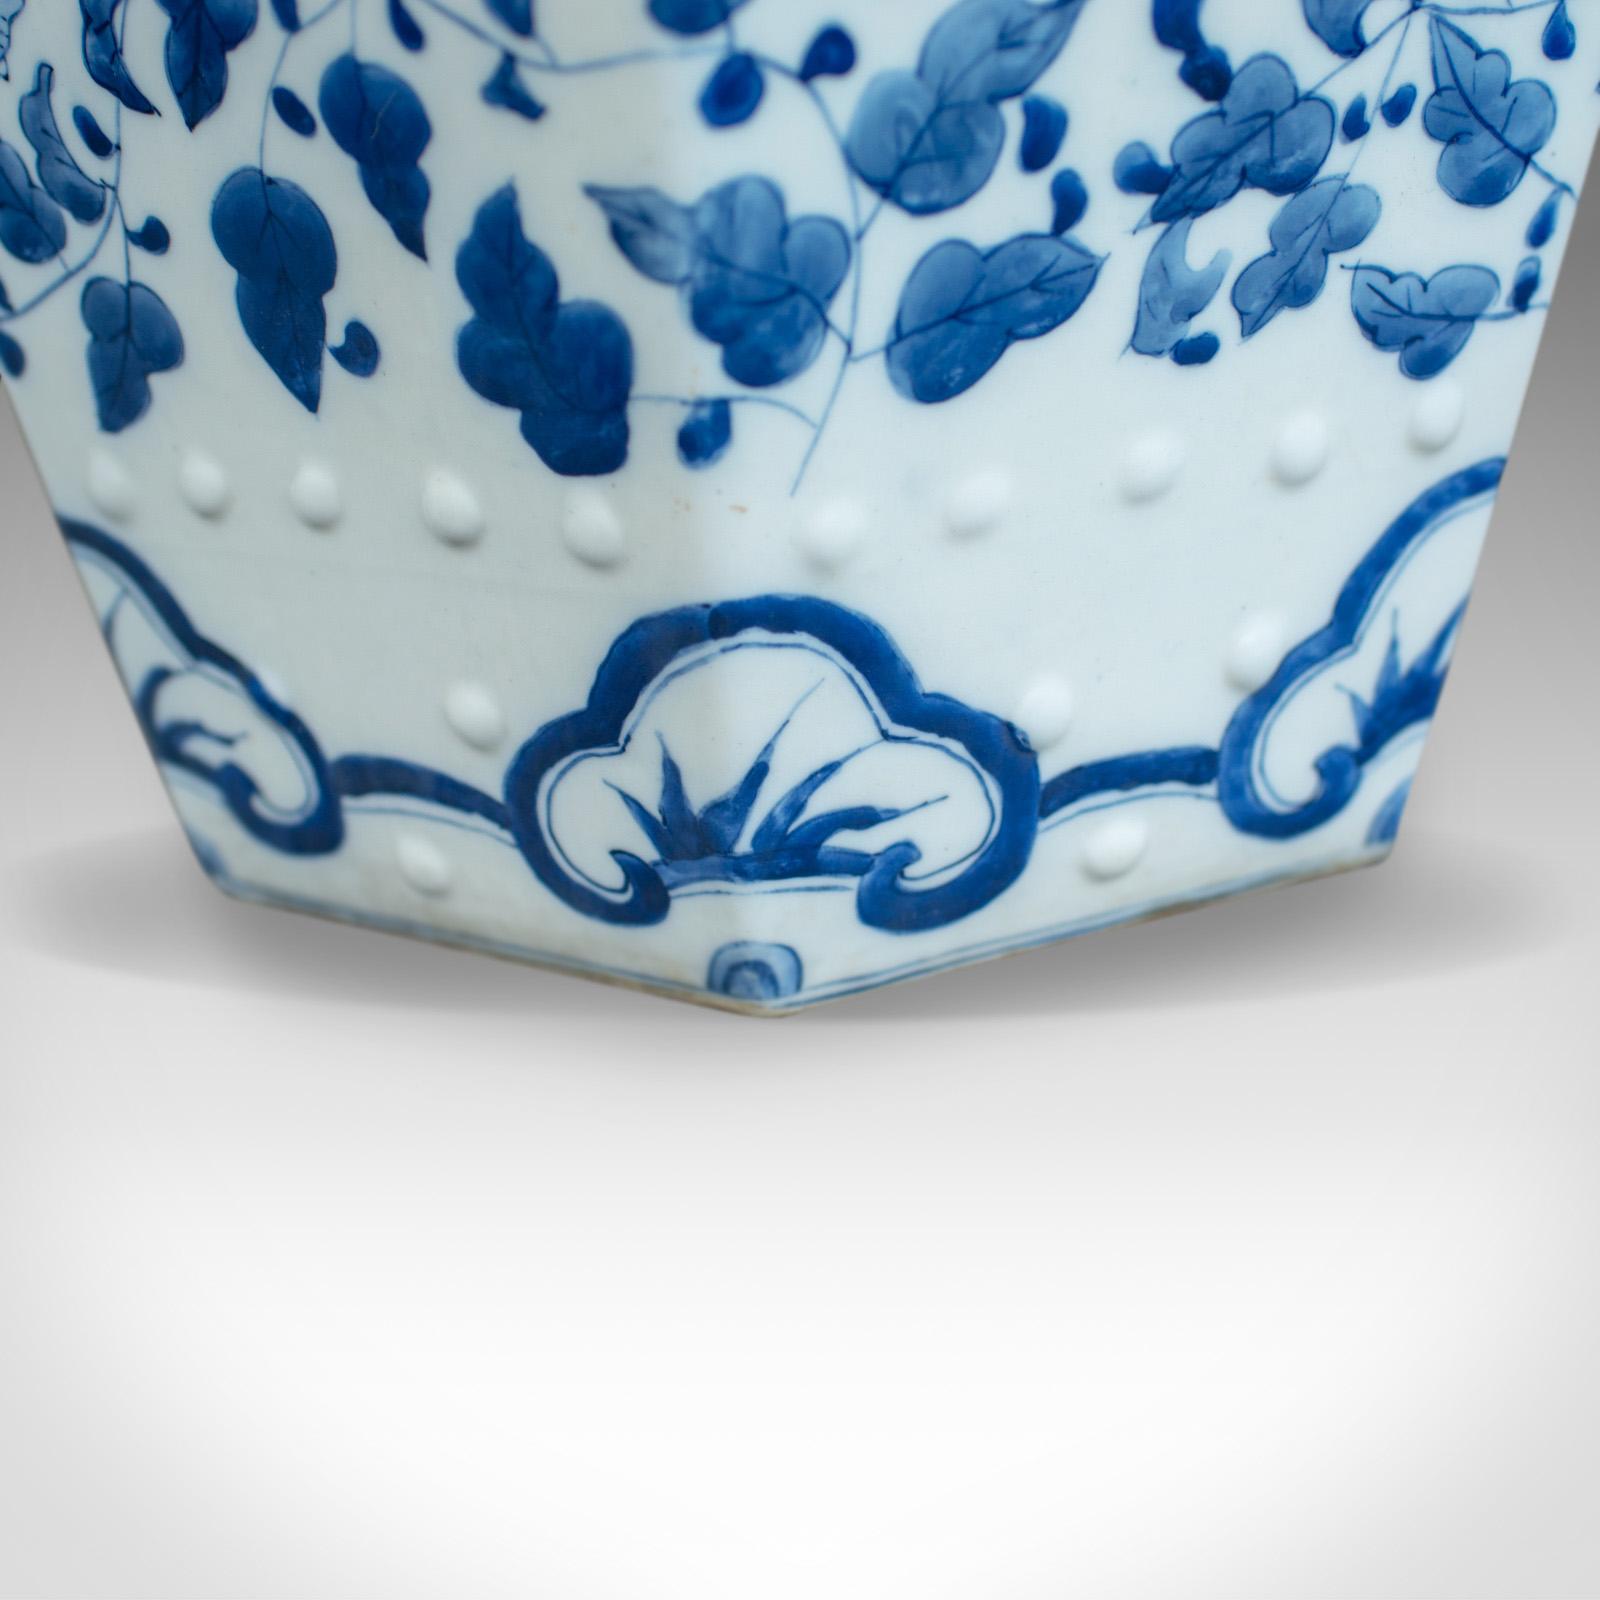 Chinese Export Ceramic Garden Stool, Chinese, Blue & White, Seat, Plant Stand, 20th Century